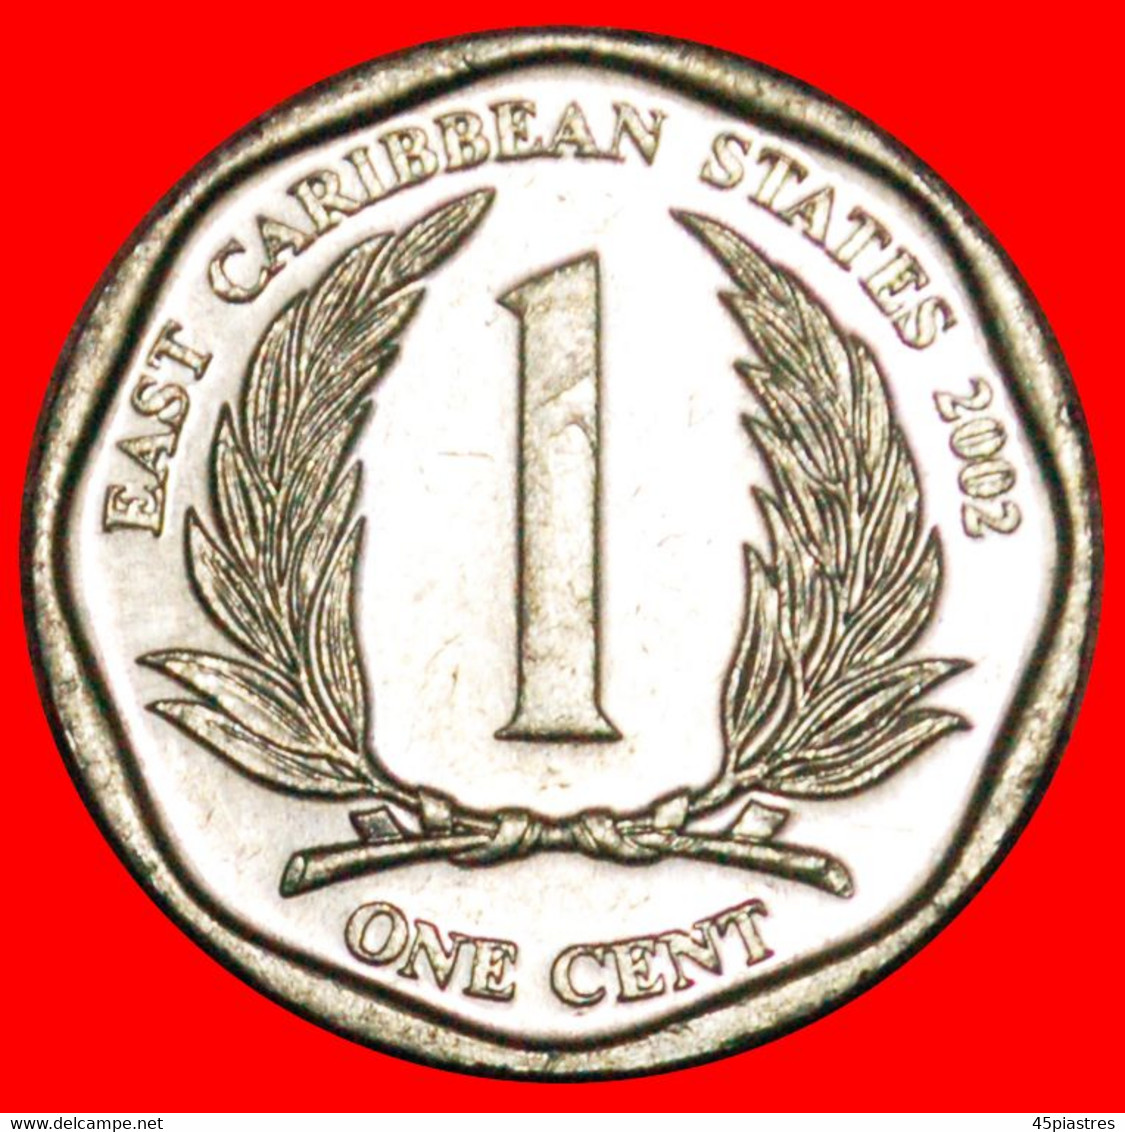 * ROUND (2002-2013): EAST CARIBBEAN STATES ★ 1 CENT 2002 DISCOVERY COIN! MINT LUSTRE!★LOW START ★ NO RESERVE! - Ostkaribischer Staaten